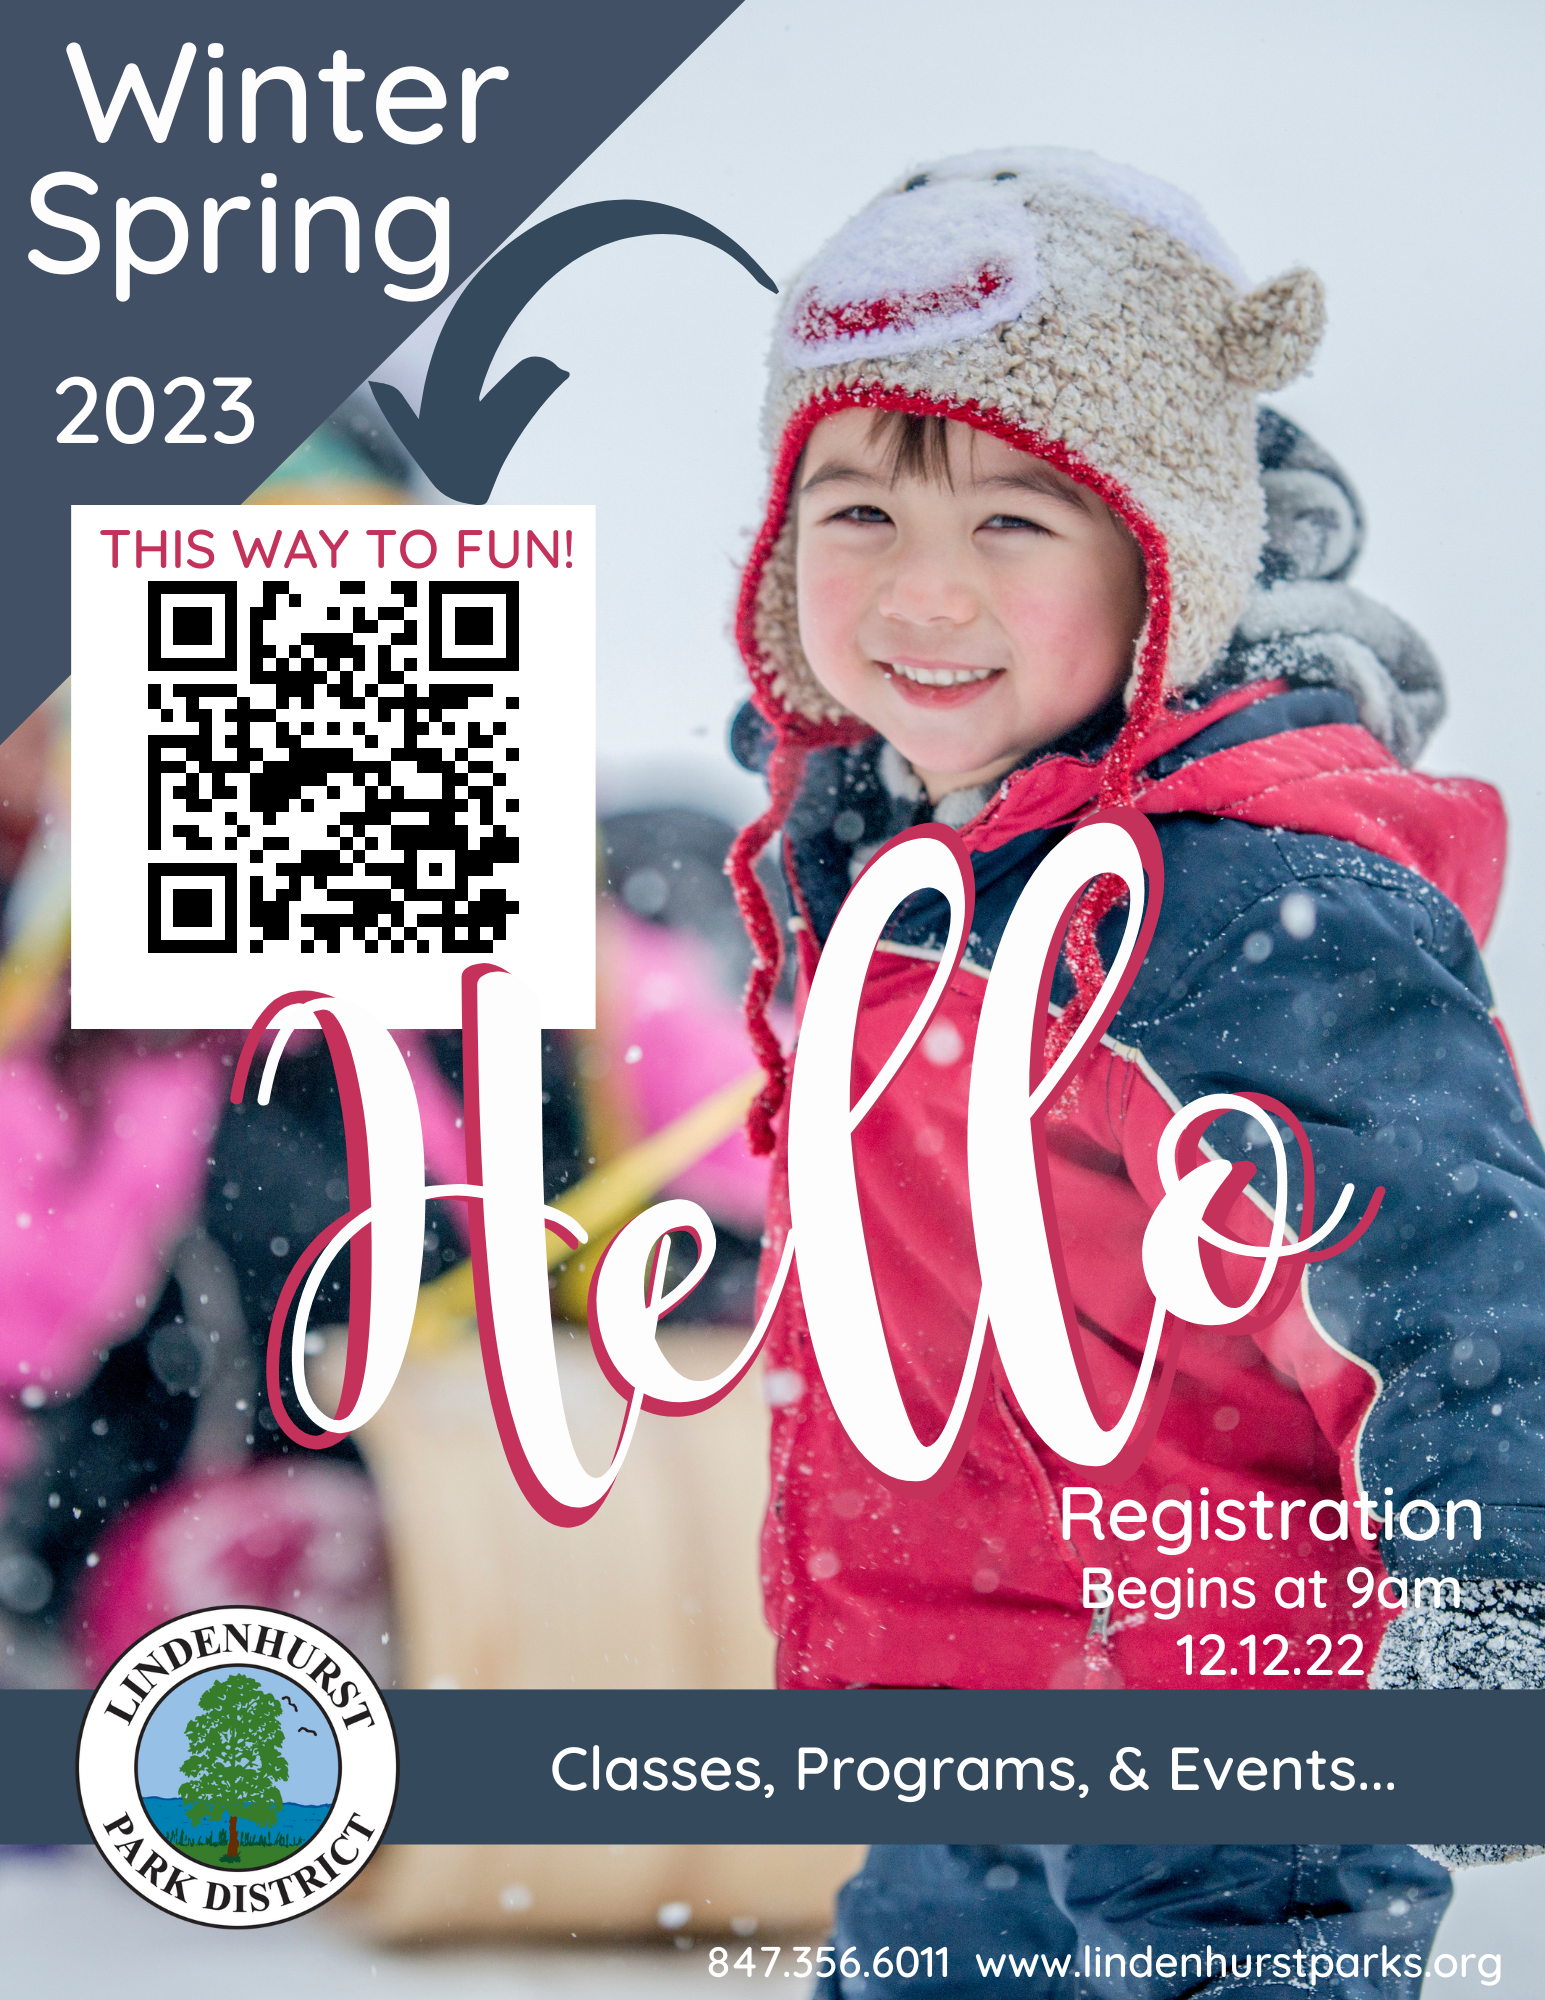 
A flyer for the Lindenhurst Park District's Winter Spring 2023 season, featuring a smiling child in winter gear with falling snow. The text "Hello" is prominently displayed, with information about class, program, and event registration starting at 9 am on December 12, 2022. The flyer includes a QR code for easy access to more information, alongside contact details for the park district